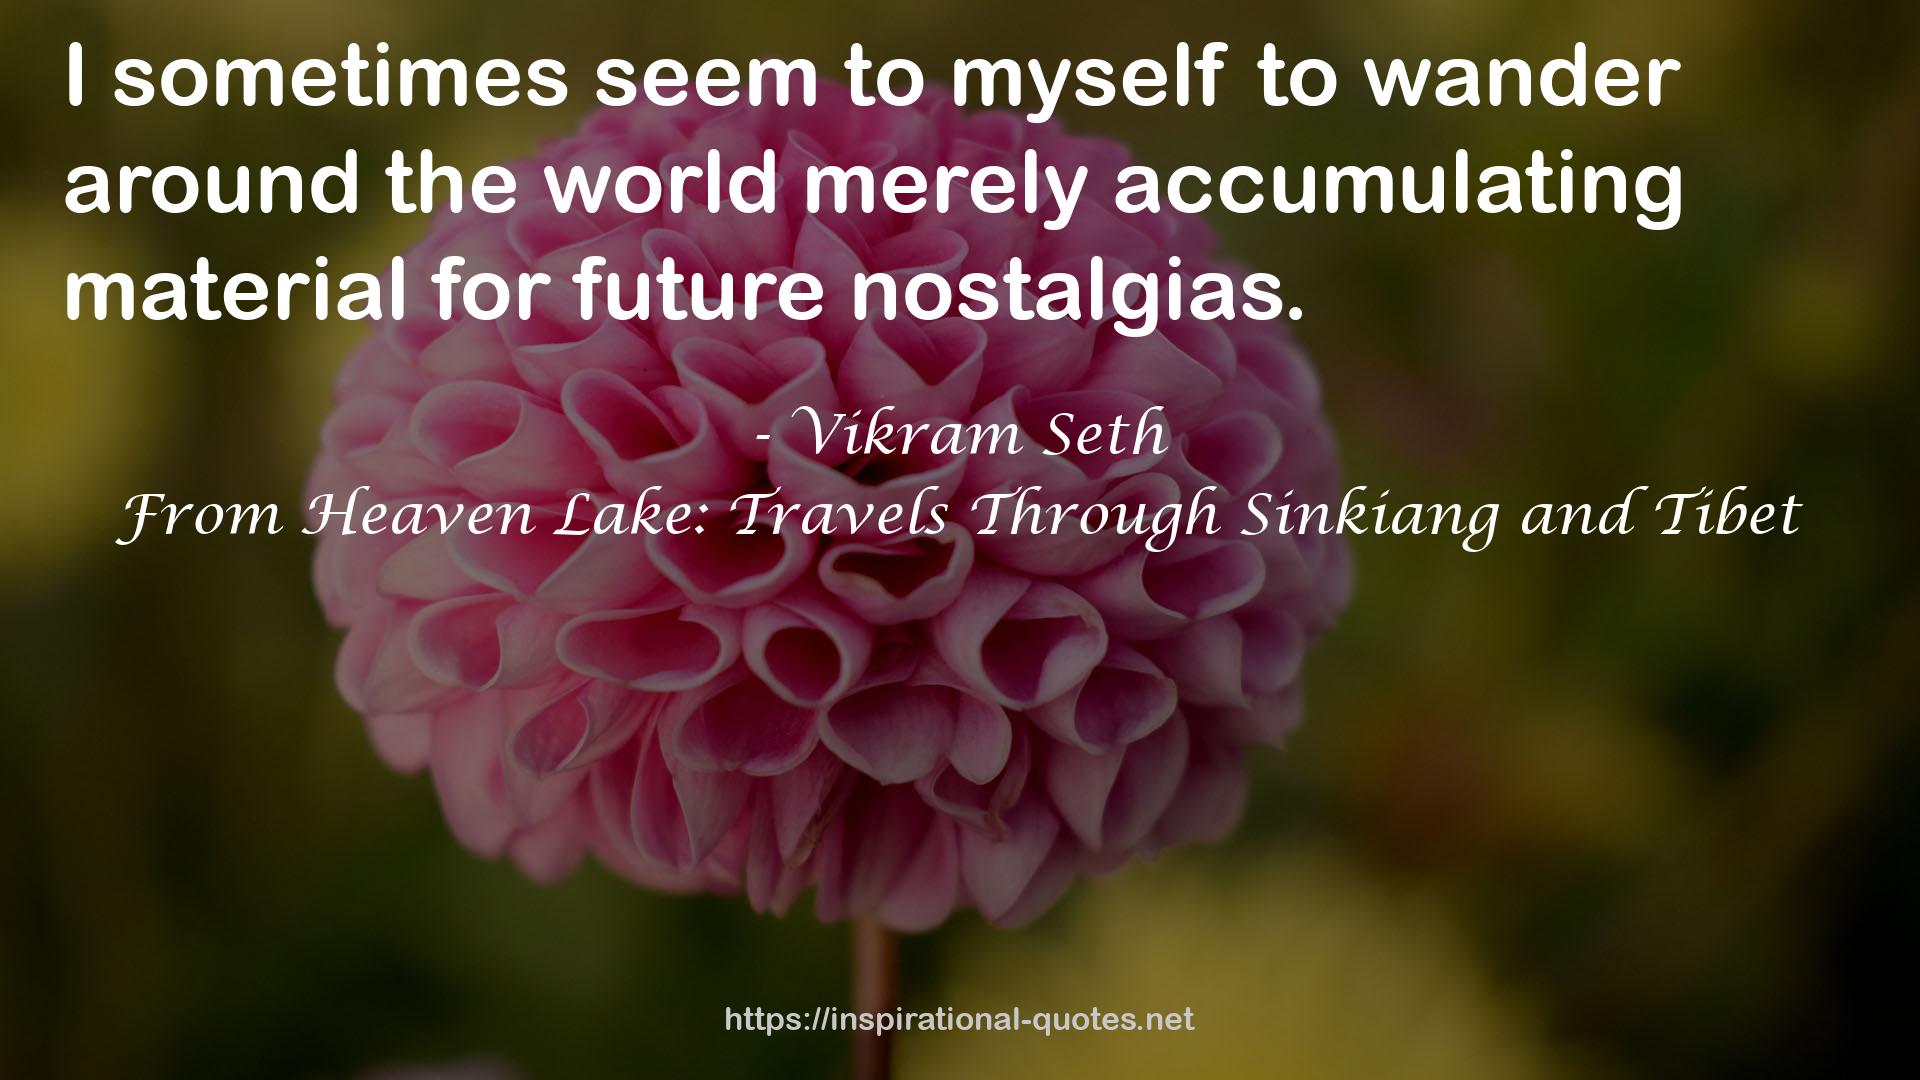 From Heaven Lake: Travels Through Sinkiang and Tibet QUOTES